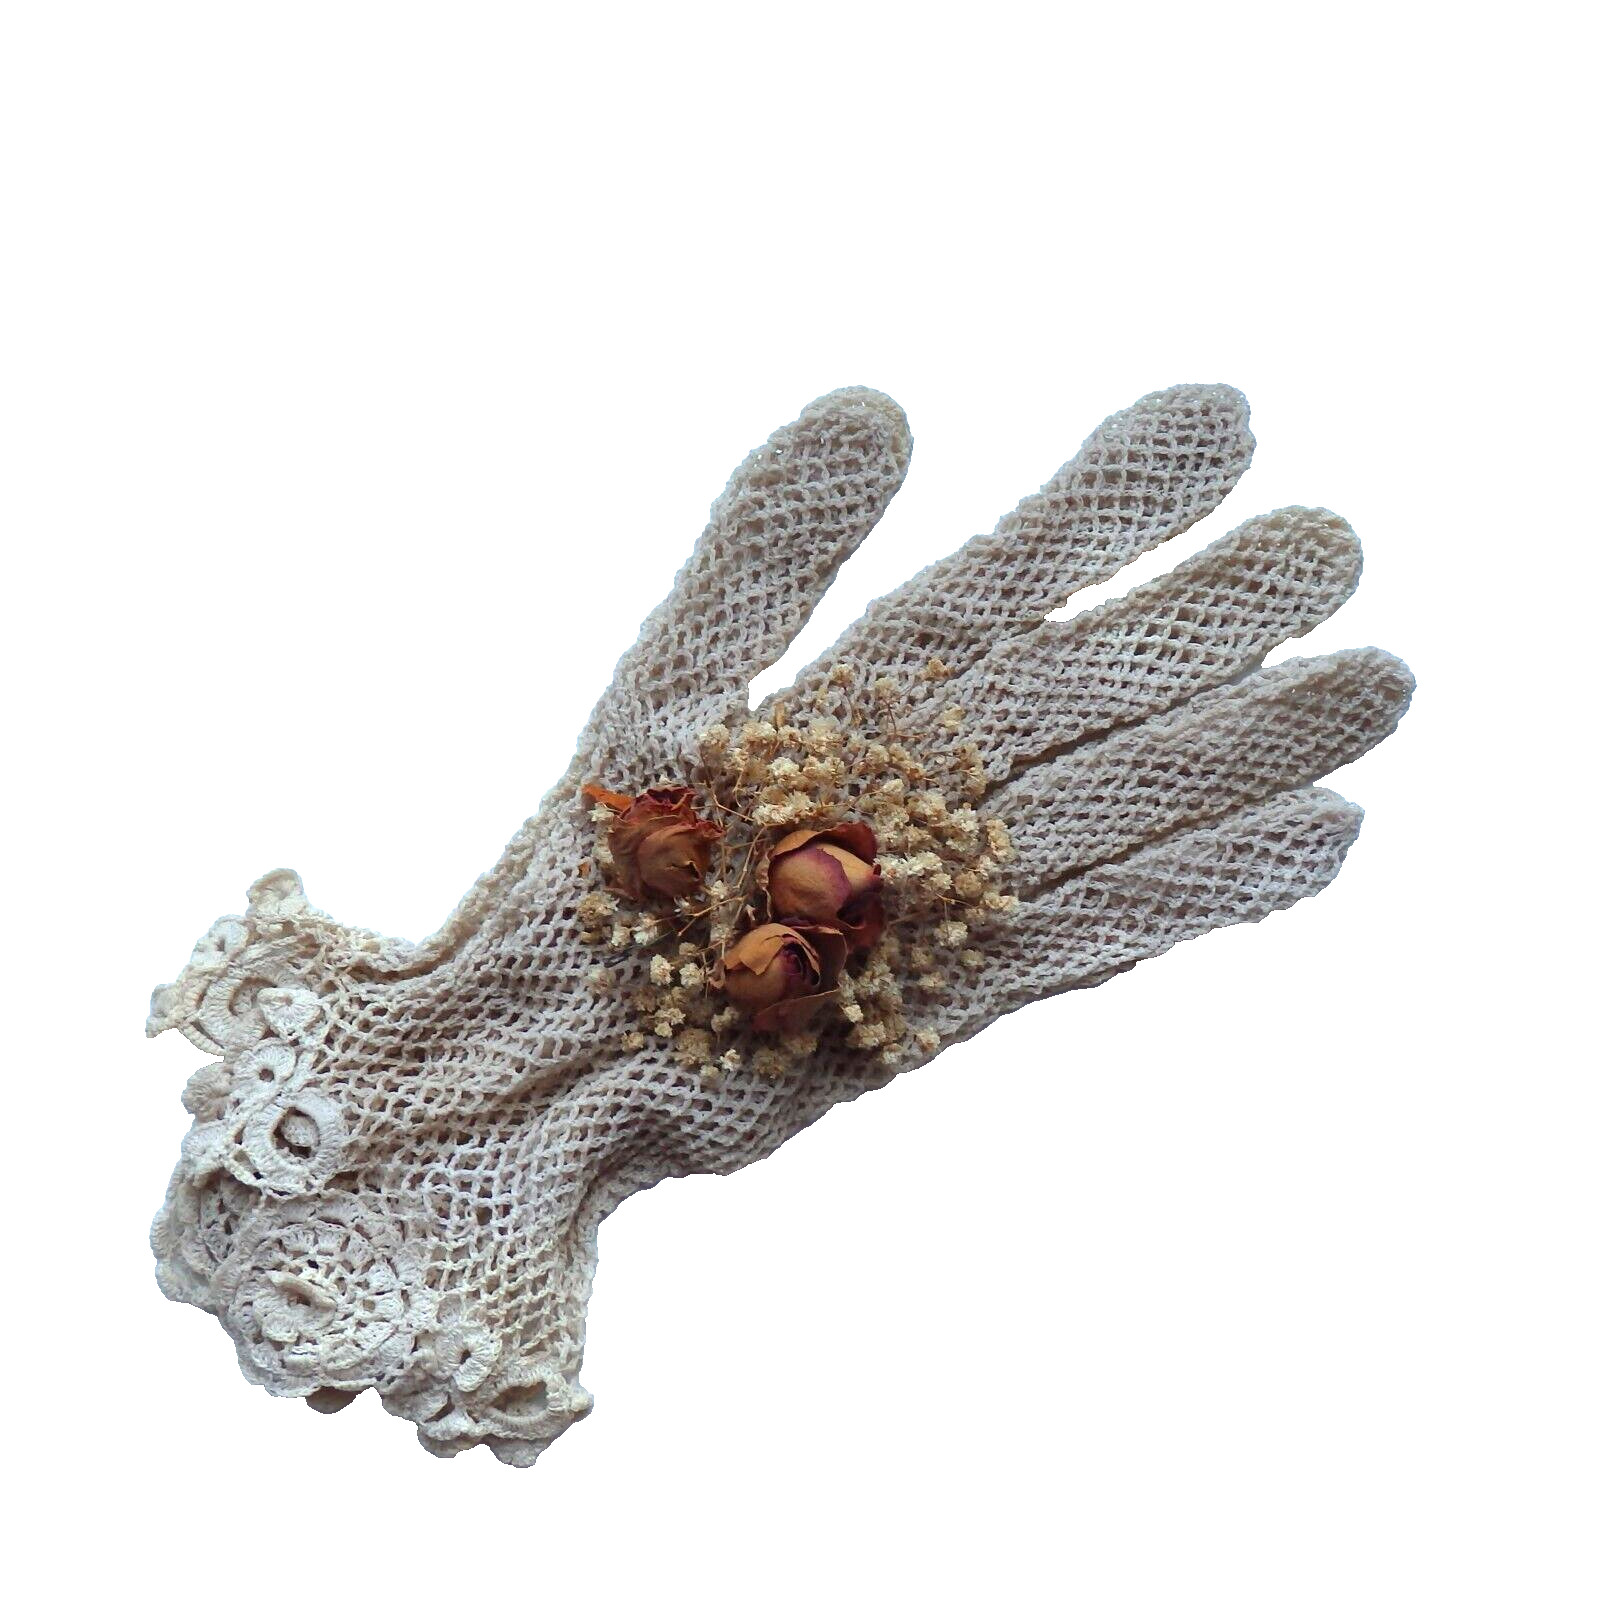 Handcrafted Vintage Victorian Crocheted Gloved Hand with Flower Accents